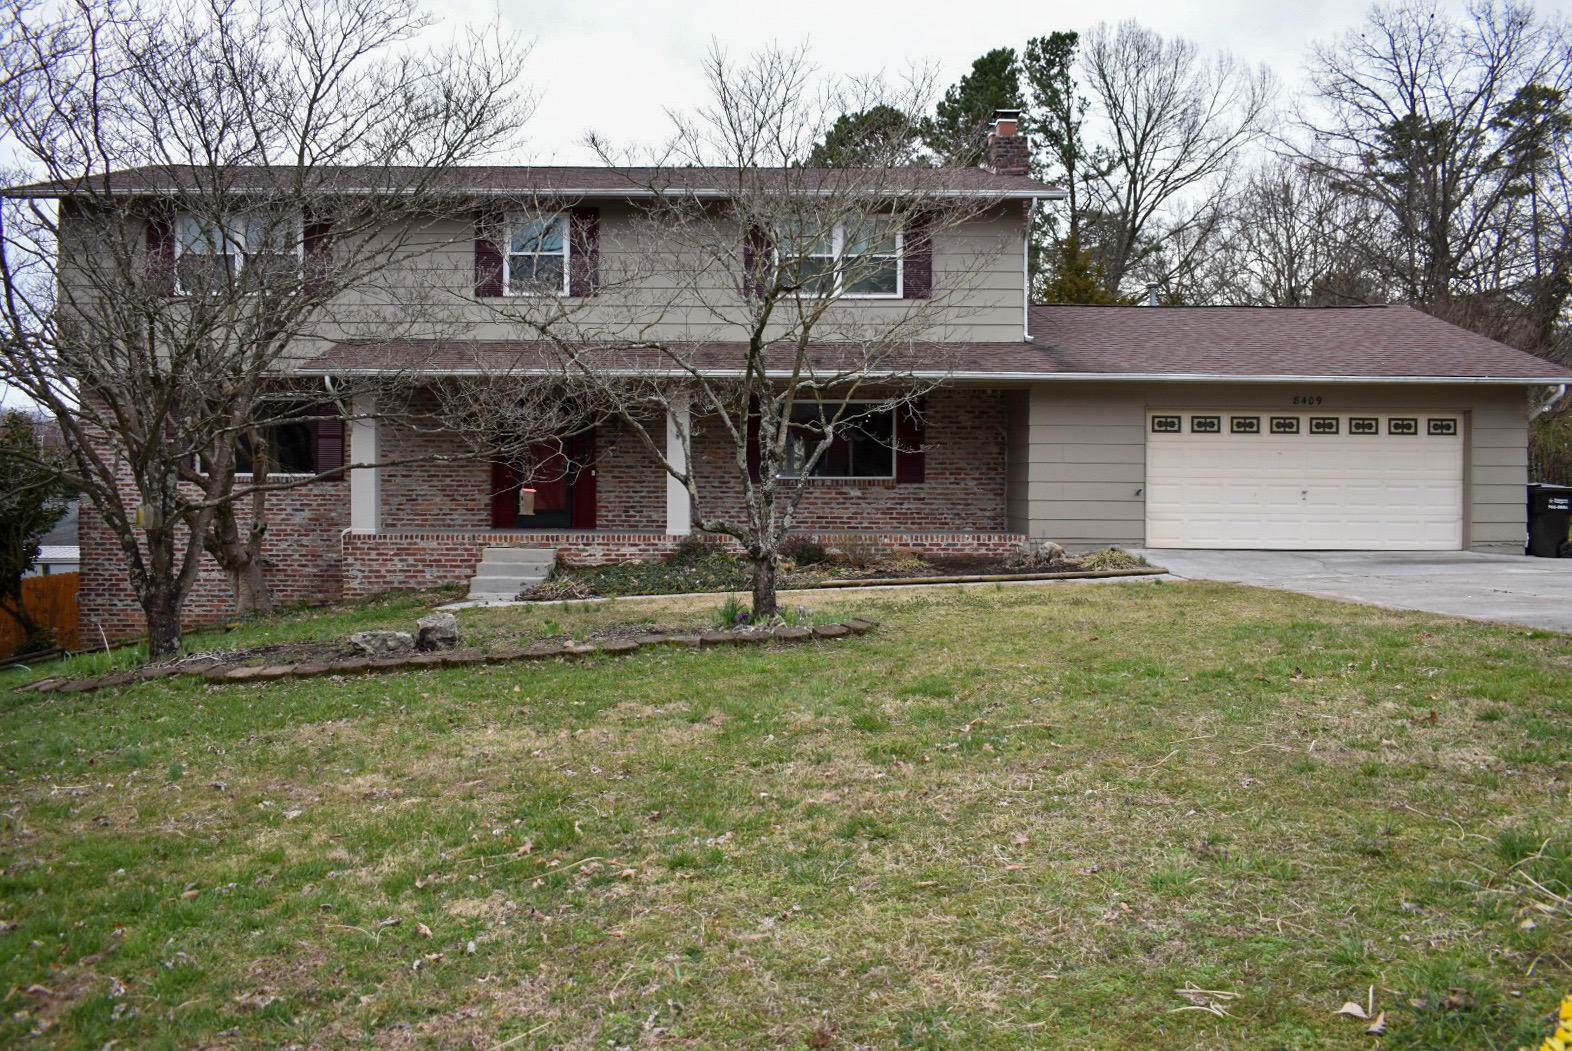 8409 Richland Colony Rd, Knoxville, TN 37923